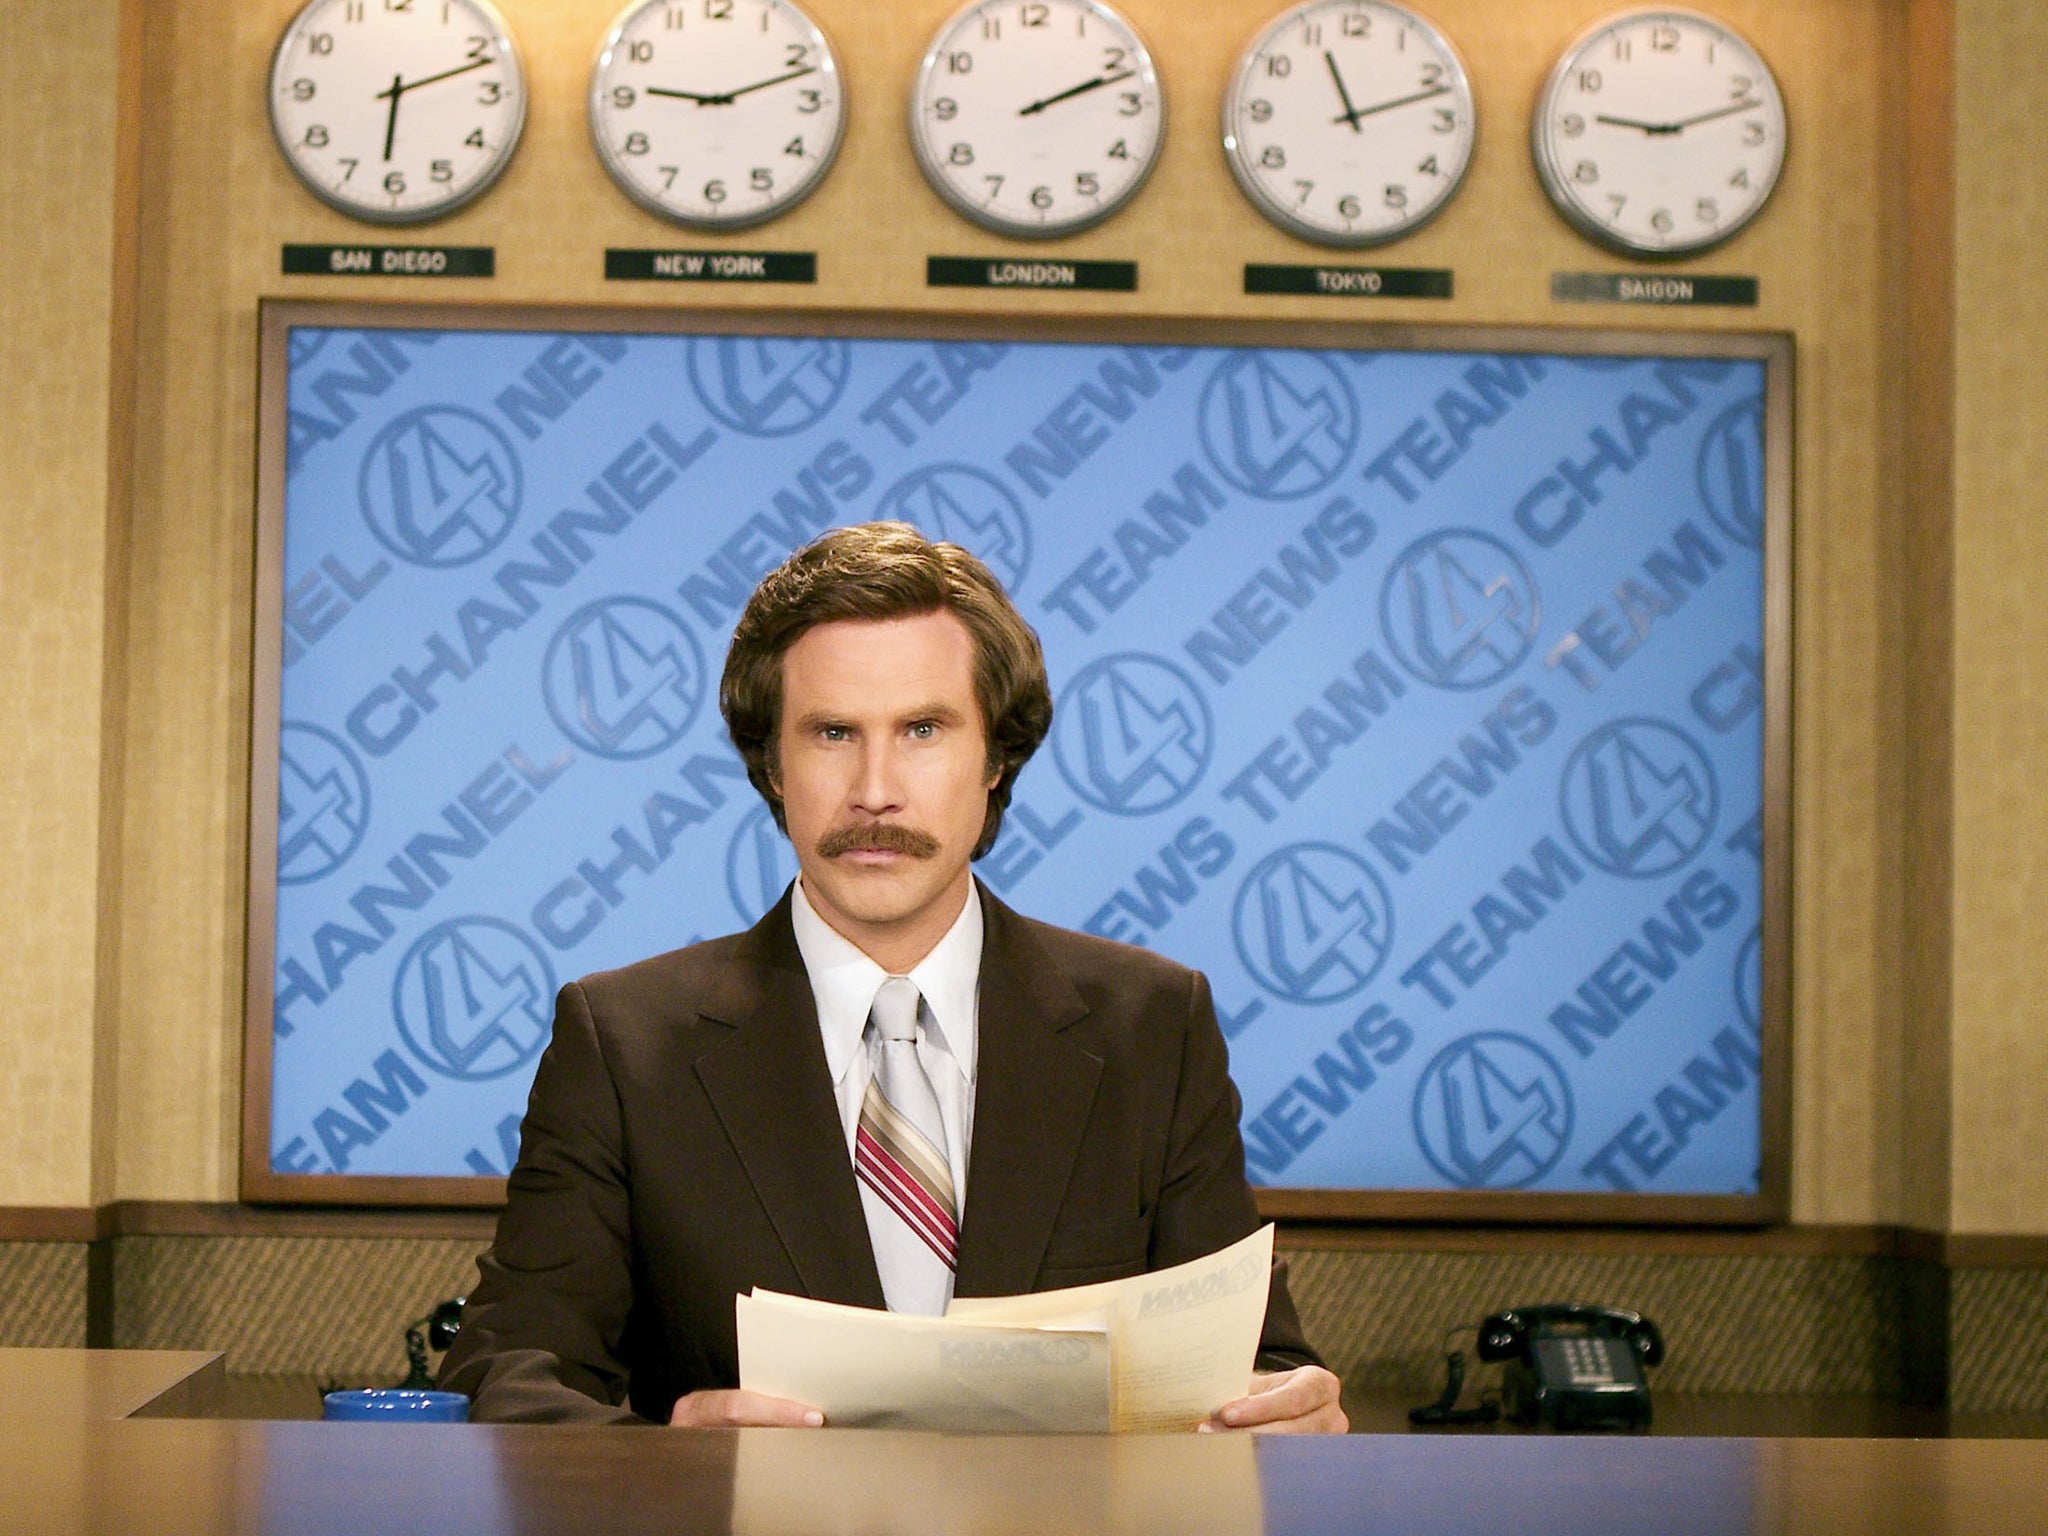 Will Ferrell as Ron Burgundy in ‘Anchorman’